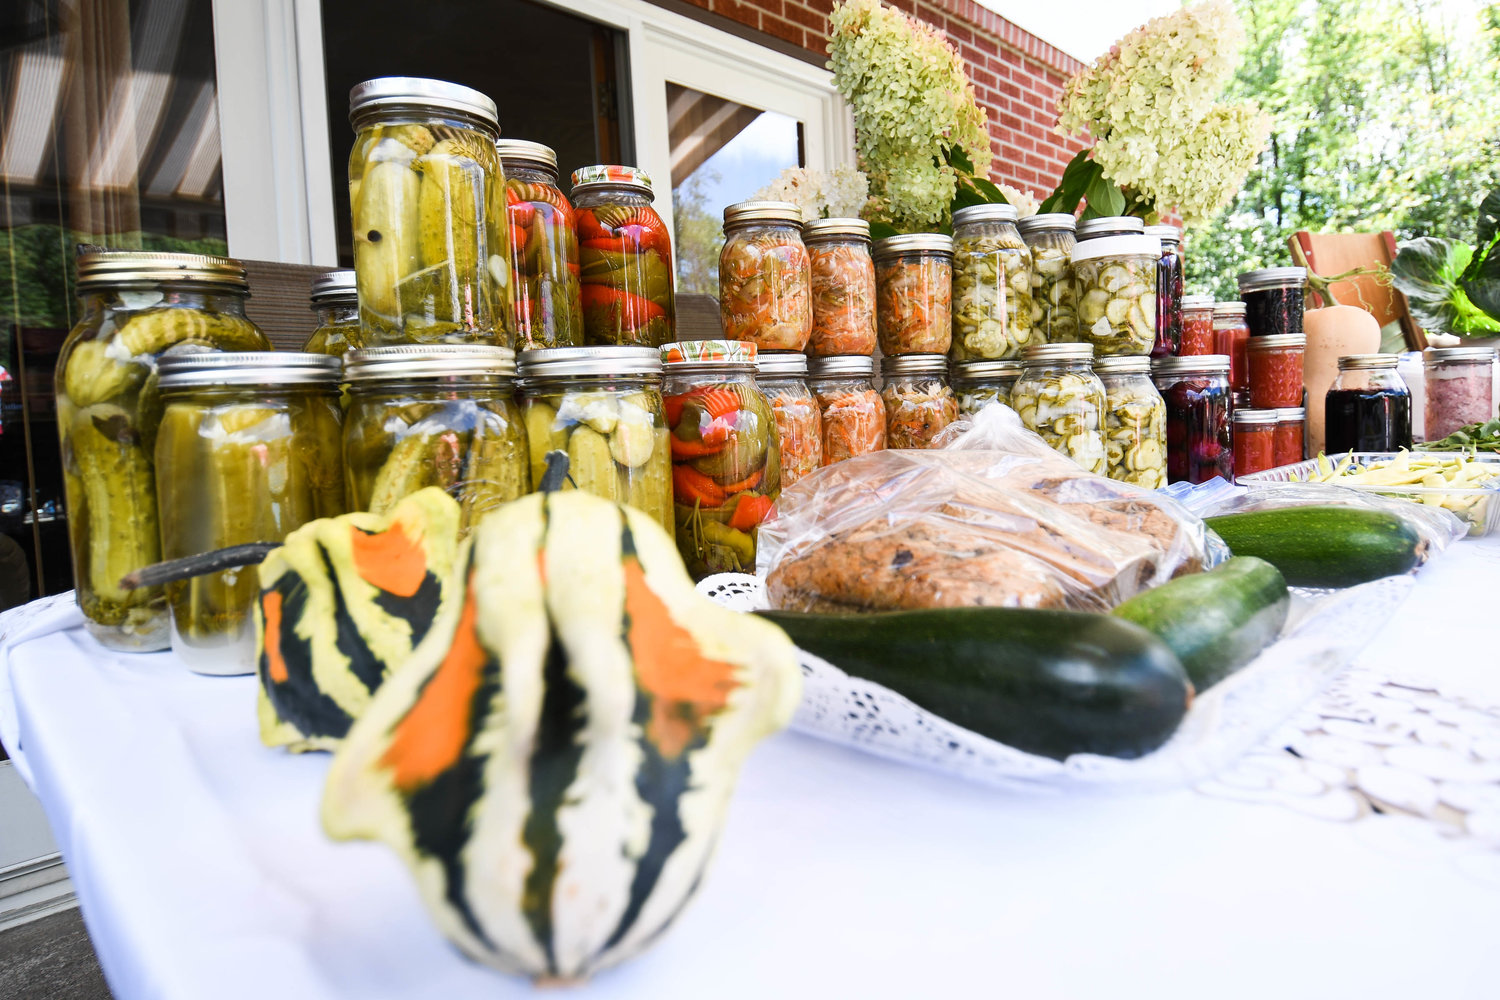 Sophie Bartoszek cans a variety of fruits and vegetables from her garden at home in Marcy. She also cans traditional Polish meats.